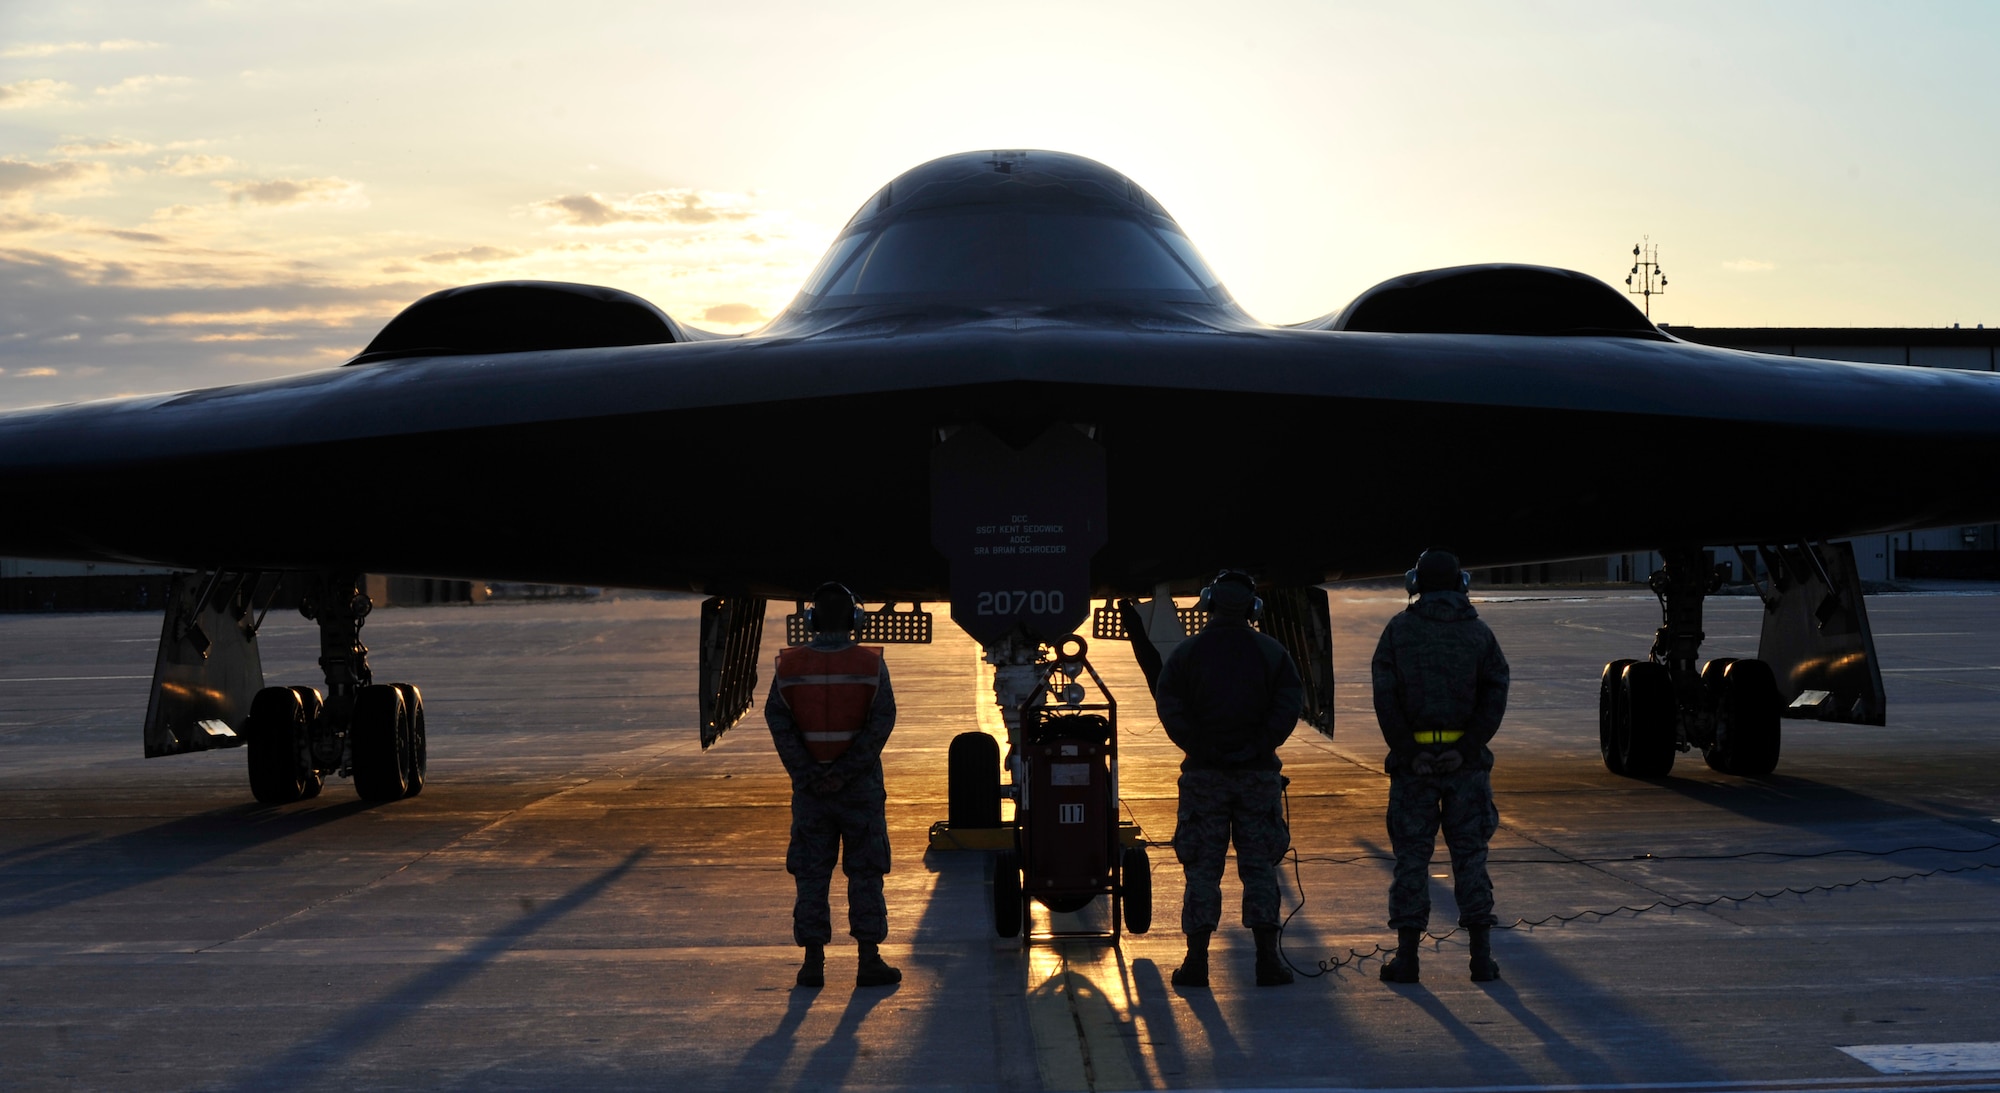 U.S. Air Force B-2 Spirit crew chiefs stand ready to perform maintenance on the “Spirit of Florida” after completing a historic training mission in which it became the first B-2 to reach 7,000 flight hours, Whiteman Air Force Base, Mo., April 1, 2013. Major Benjamin Kaminsky flew this historic mission, and crew chief Airman 1st Class Elijah Noel landed the aircraft. (U.S. Air Force photo by Airman 1st Class Keenan Berry/Released)